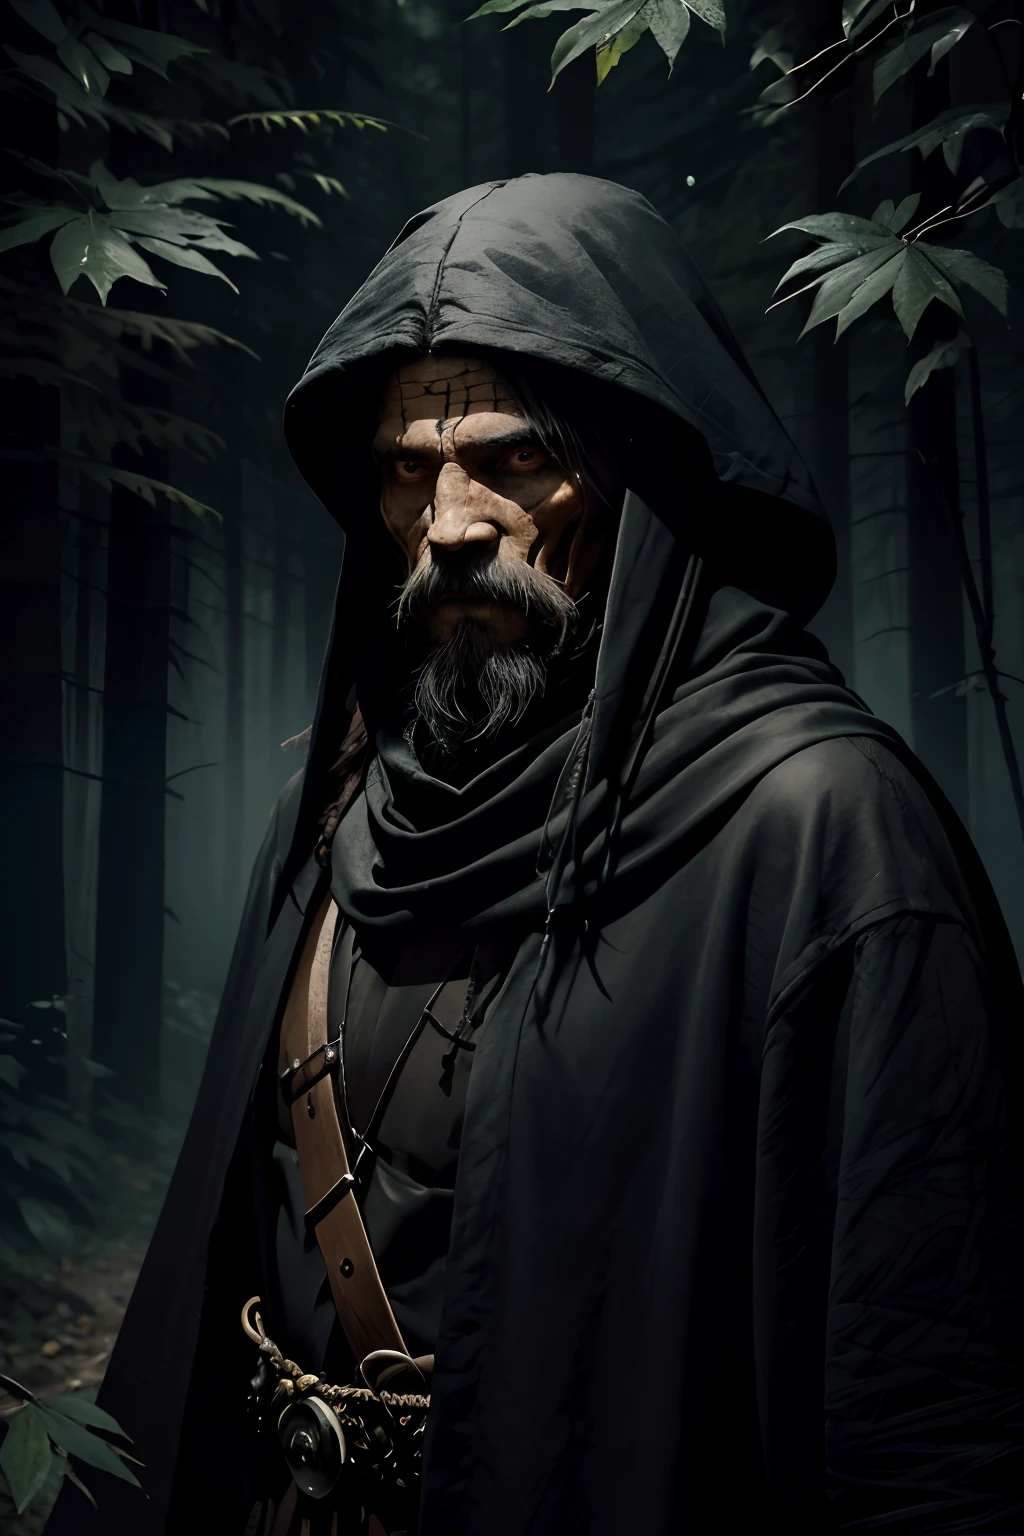 In the dark thicket of the forest stands  man. The man is dressed in black rags, The man's head and face is covered with an animal skull. Animal skull mask. Man has big slash scar on left eye. Man is member of the forest tribe, clothing must match tribal affiliation. Timeline medieval, dark fantasy, dark fantasy style, dnd style, simple background